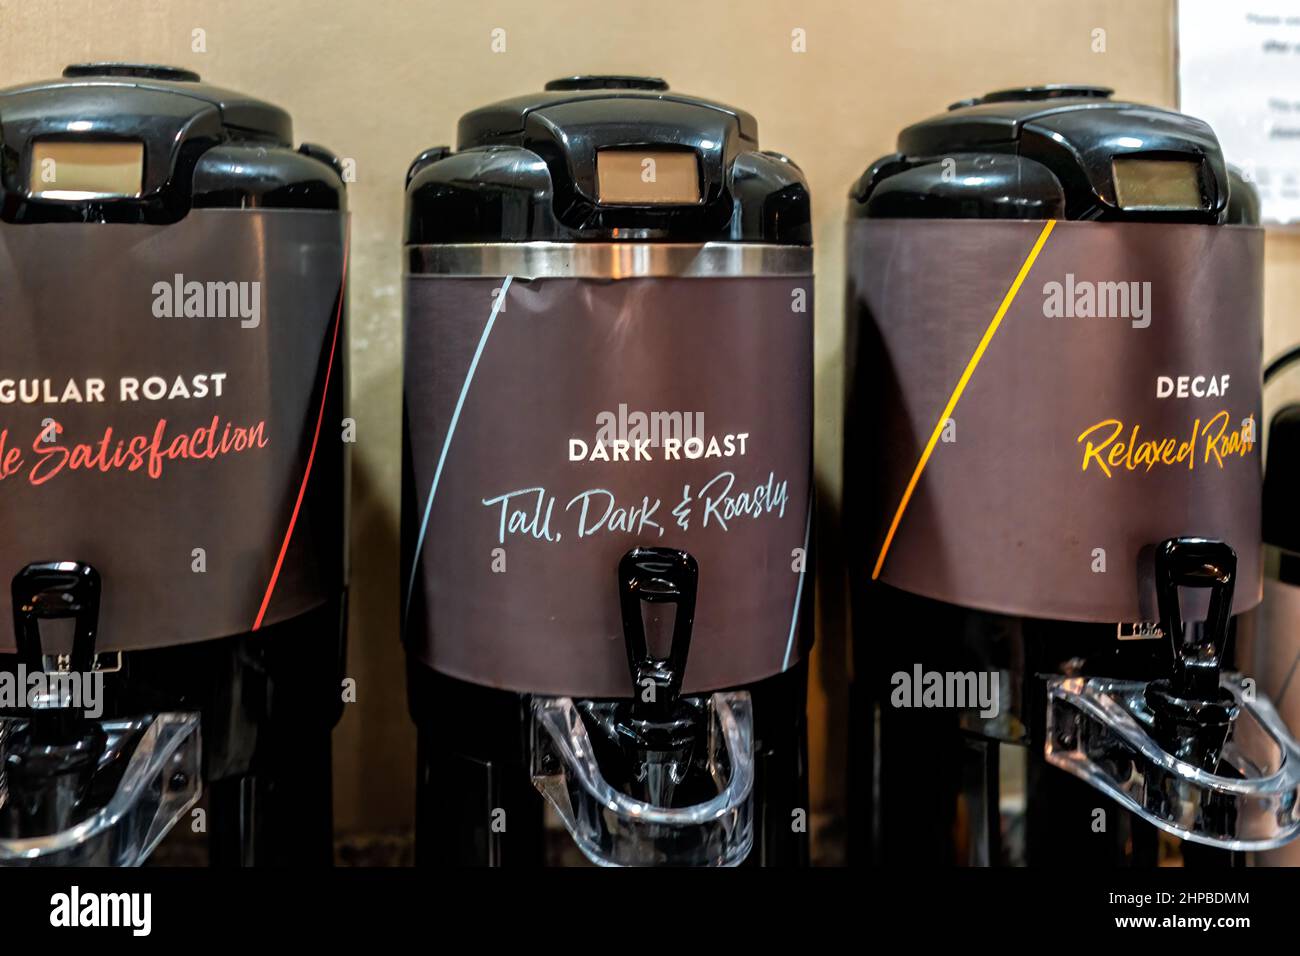 https://c8.alamy.com/comp/2HPBDMM/naples-usa-august-6-2021-ihg-staybridge-suites-hotel-morning-buffet-continental-breakfast-with-dispenser-machine-for-coffee-selection-of-dark-roa-2HPBDMM.jpg